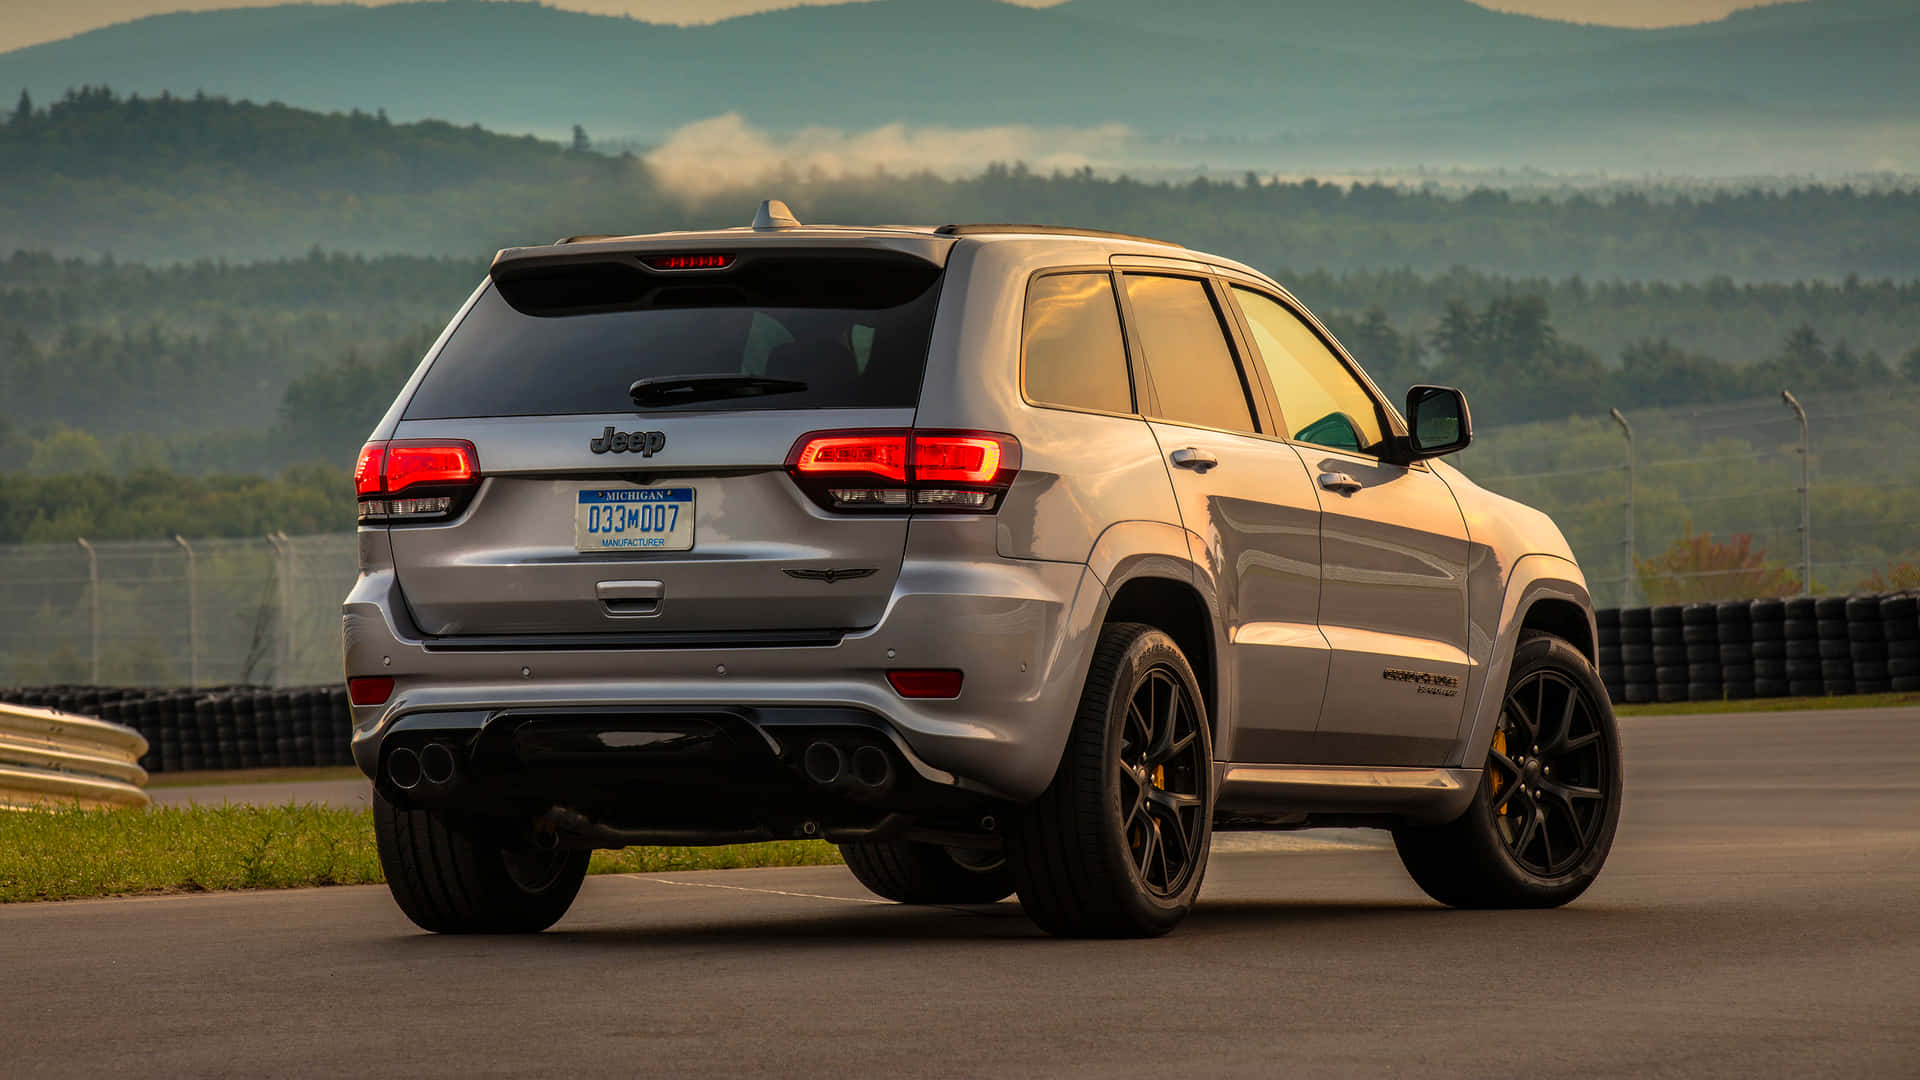 The ultimate in luxury SUV performance - the Jeep Trackhawk Wallpaper